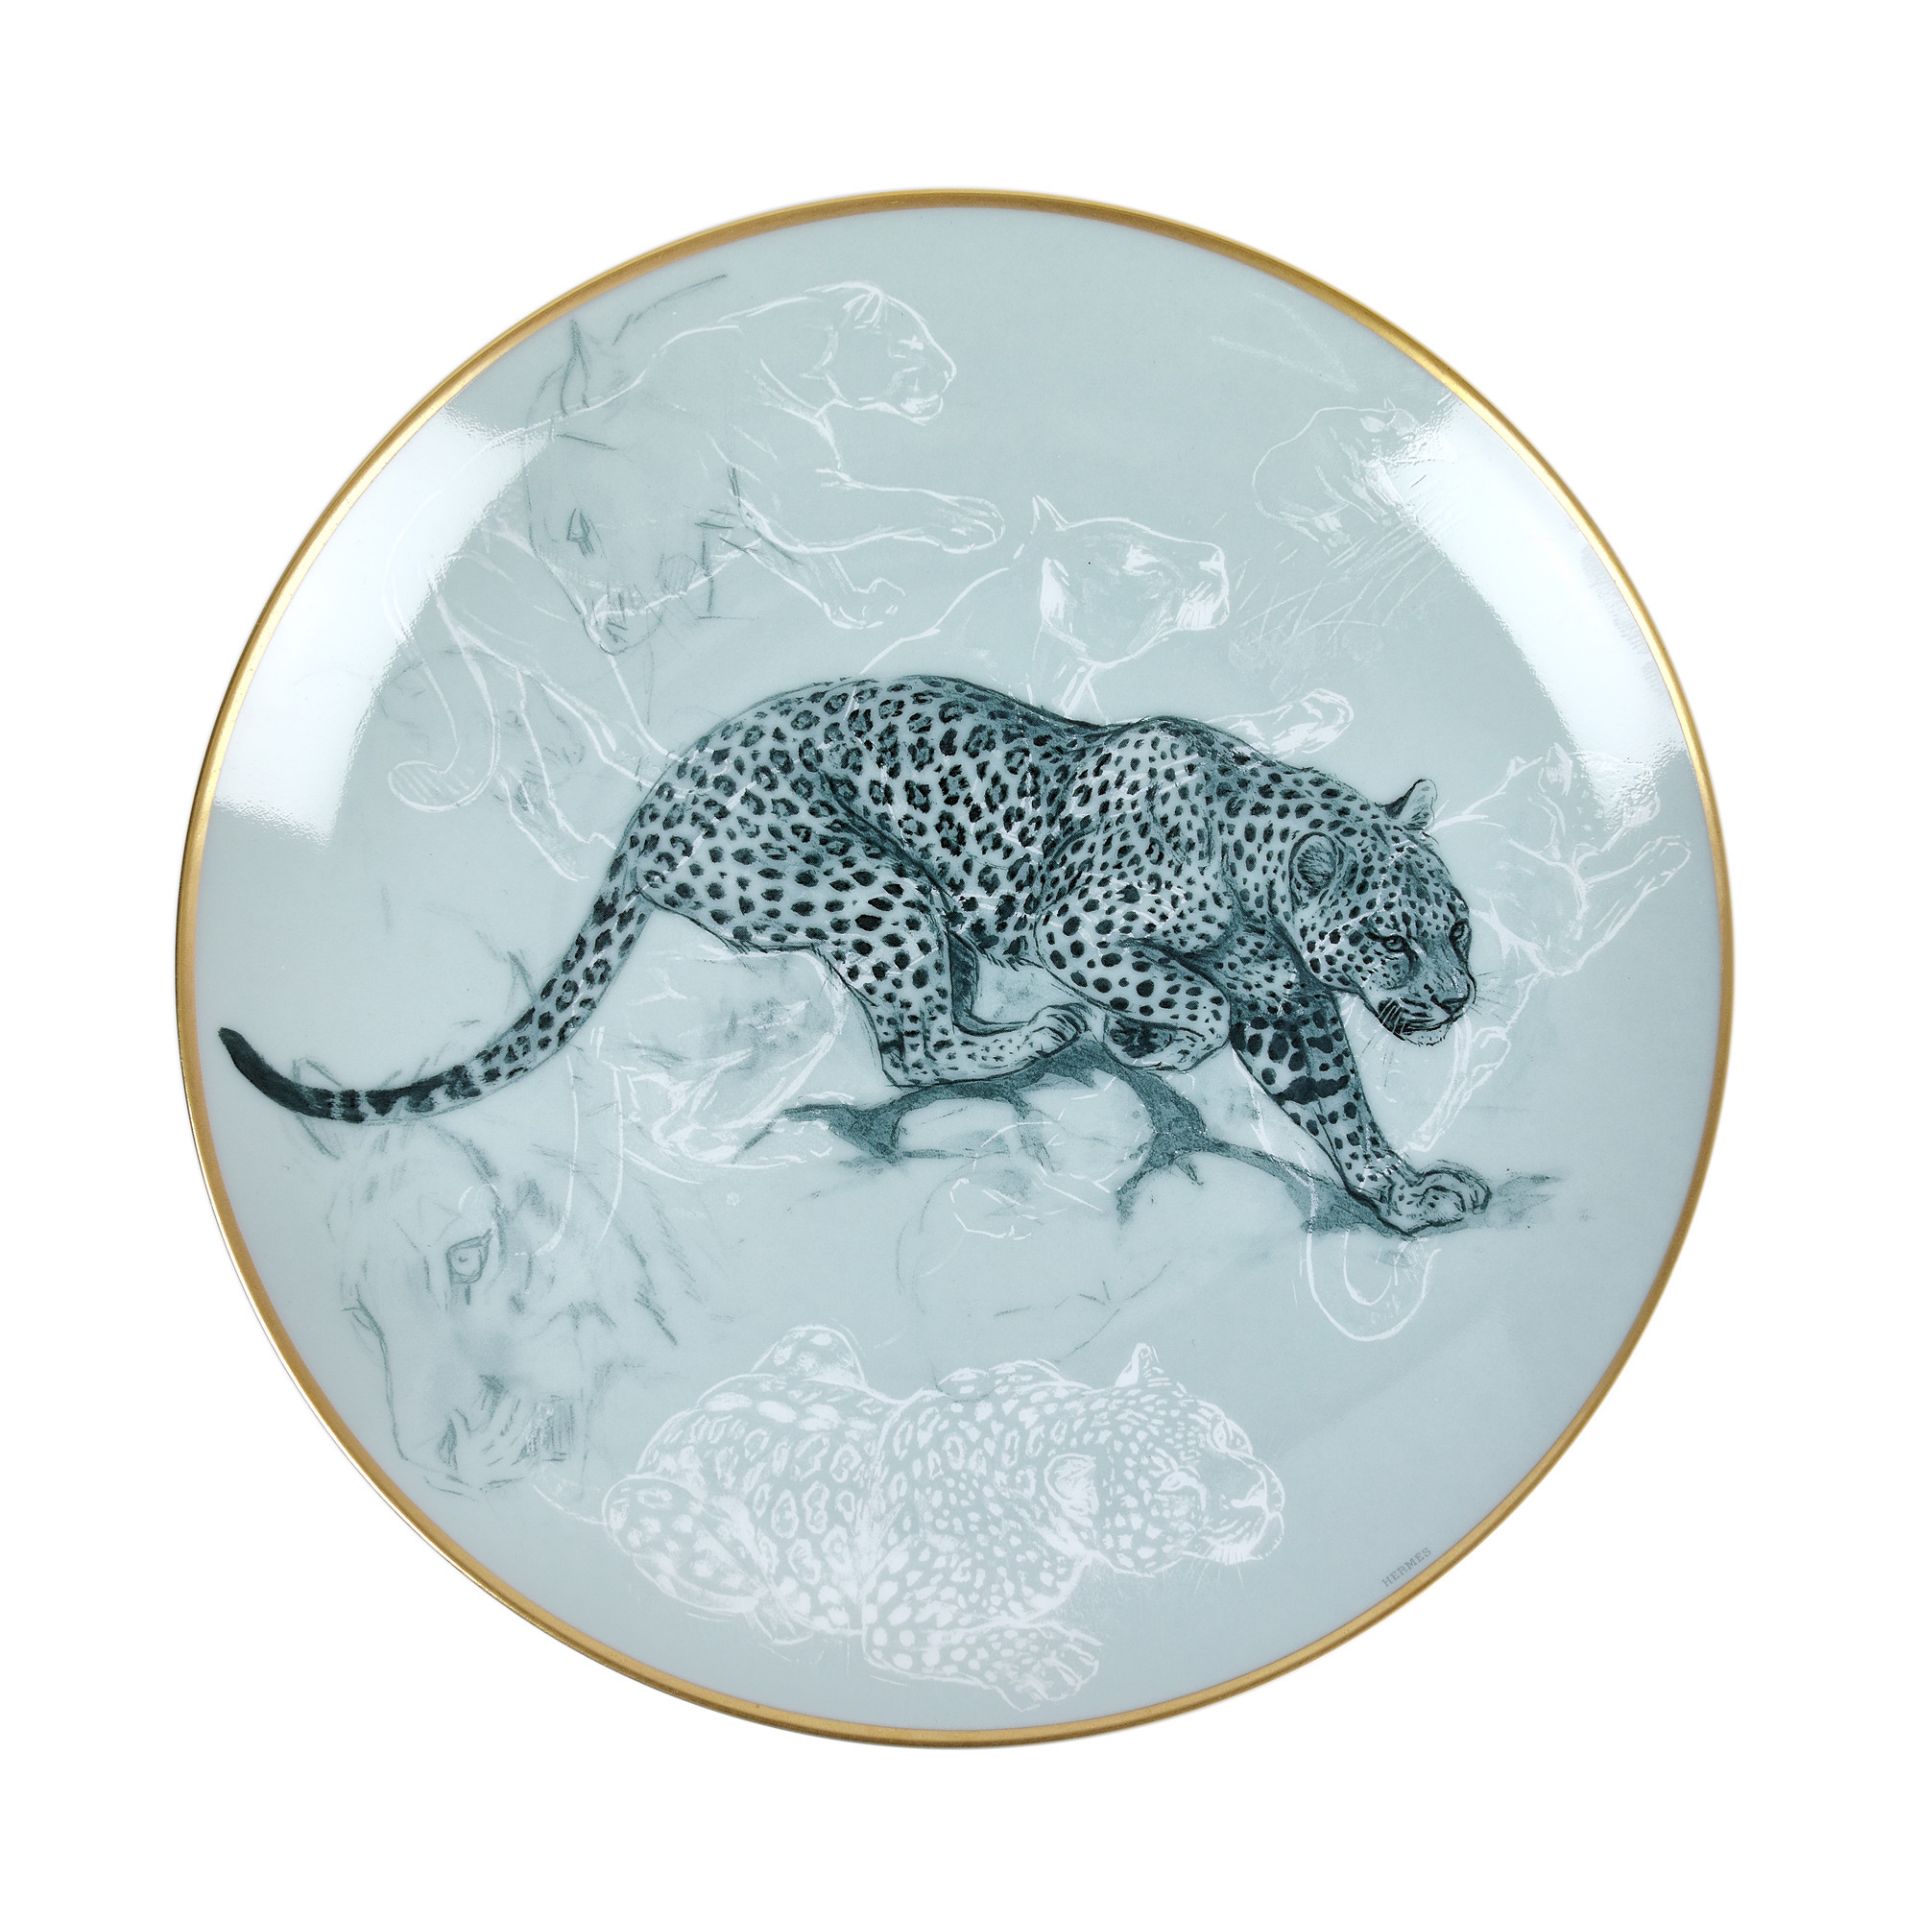 Hermès porcelain set, consisting of two plates, from the collection "Carnets d'Equateur", original b - Image 2 of 5